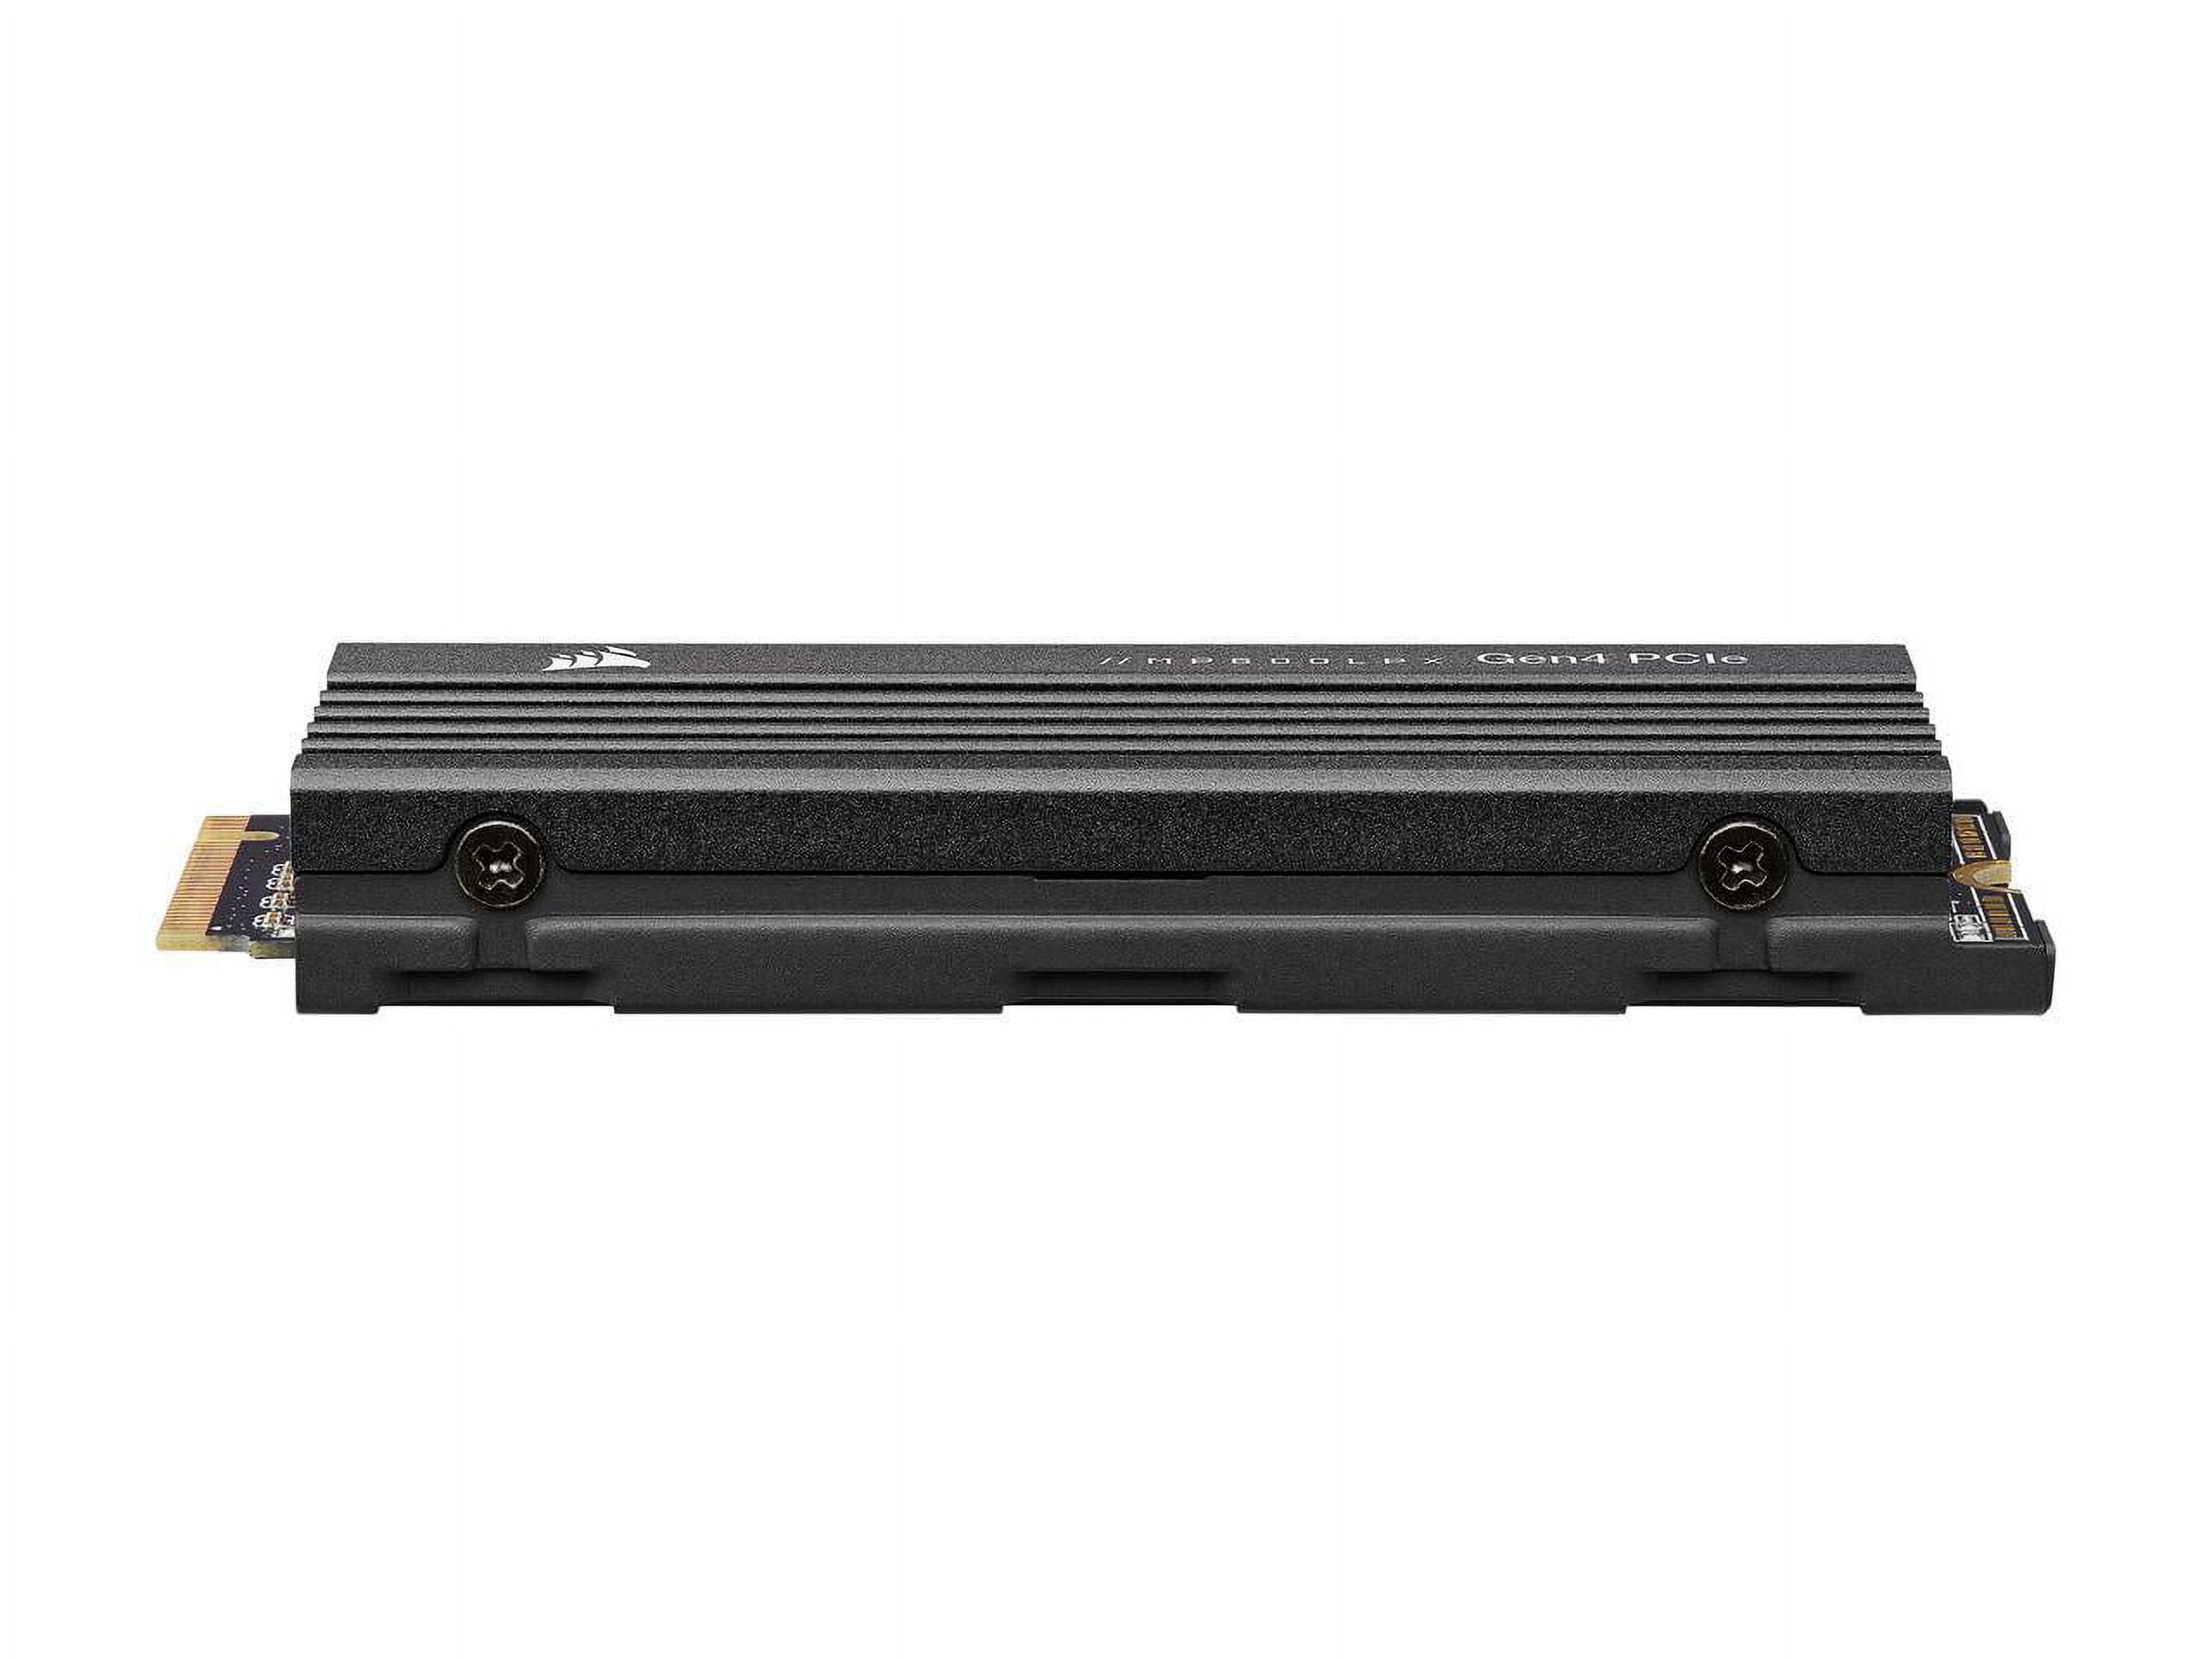 1TB Optimized Drive Corsair 2280 Solid NVMe State x4, M.2 CSSD-F1000GBMP600PLP, PCI-Express (SSD) Internal PS5 for PRO 3D 1.4 LPX 4.0 MP600